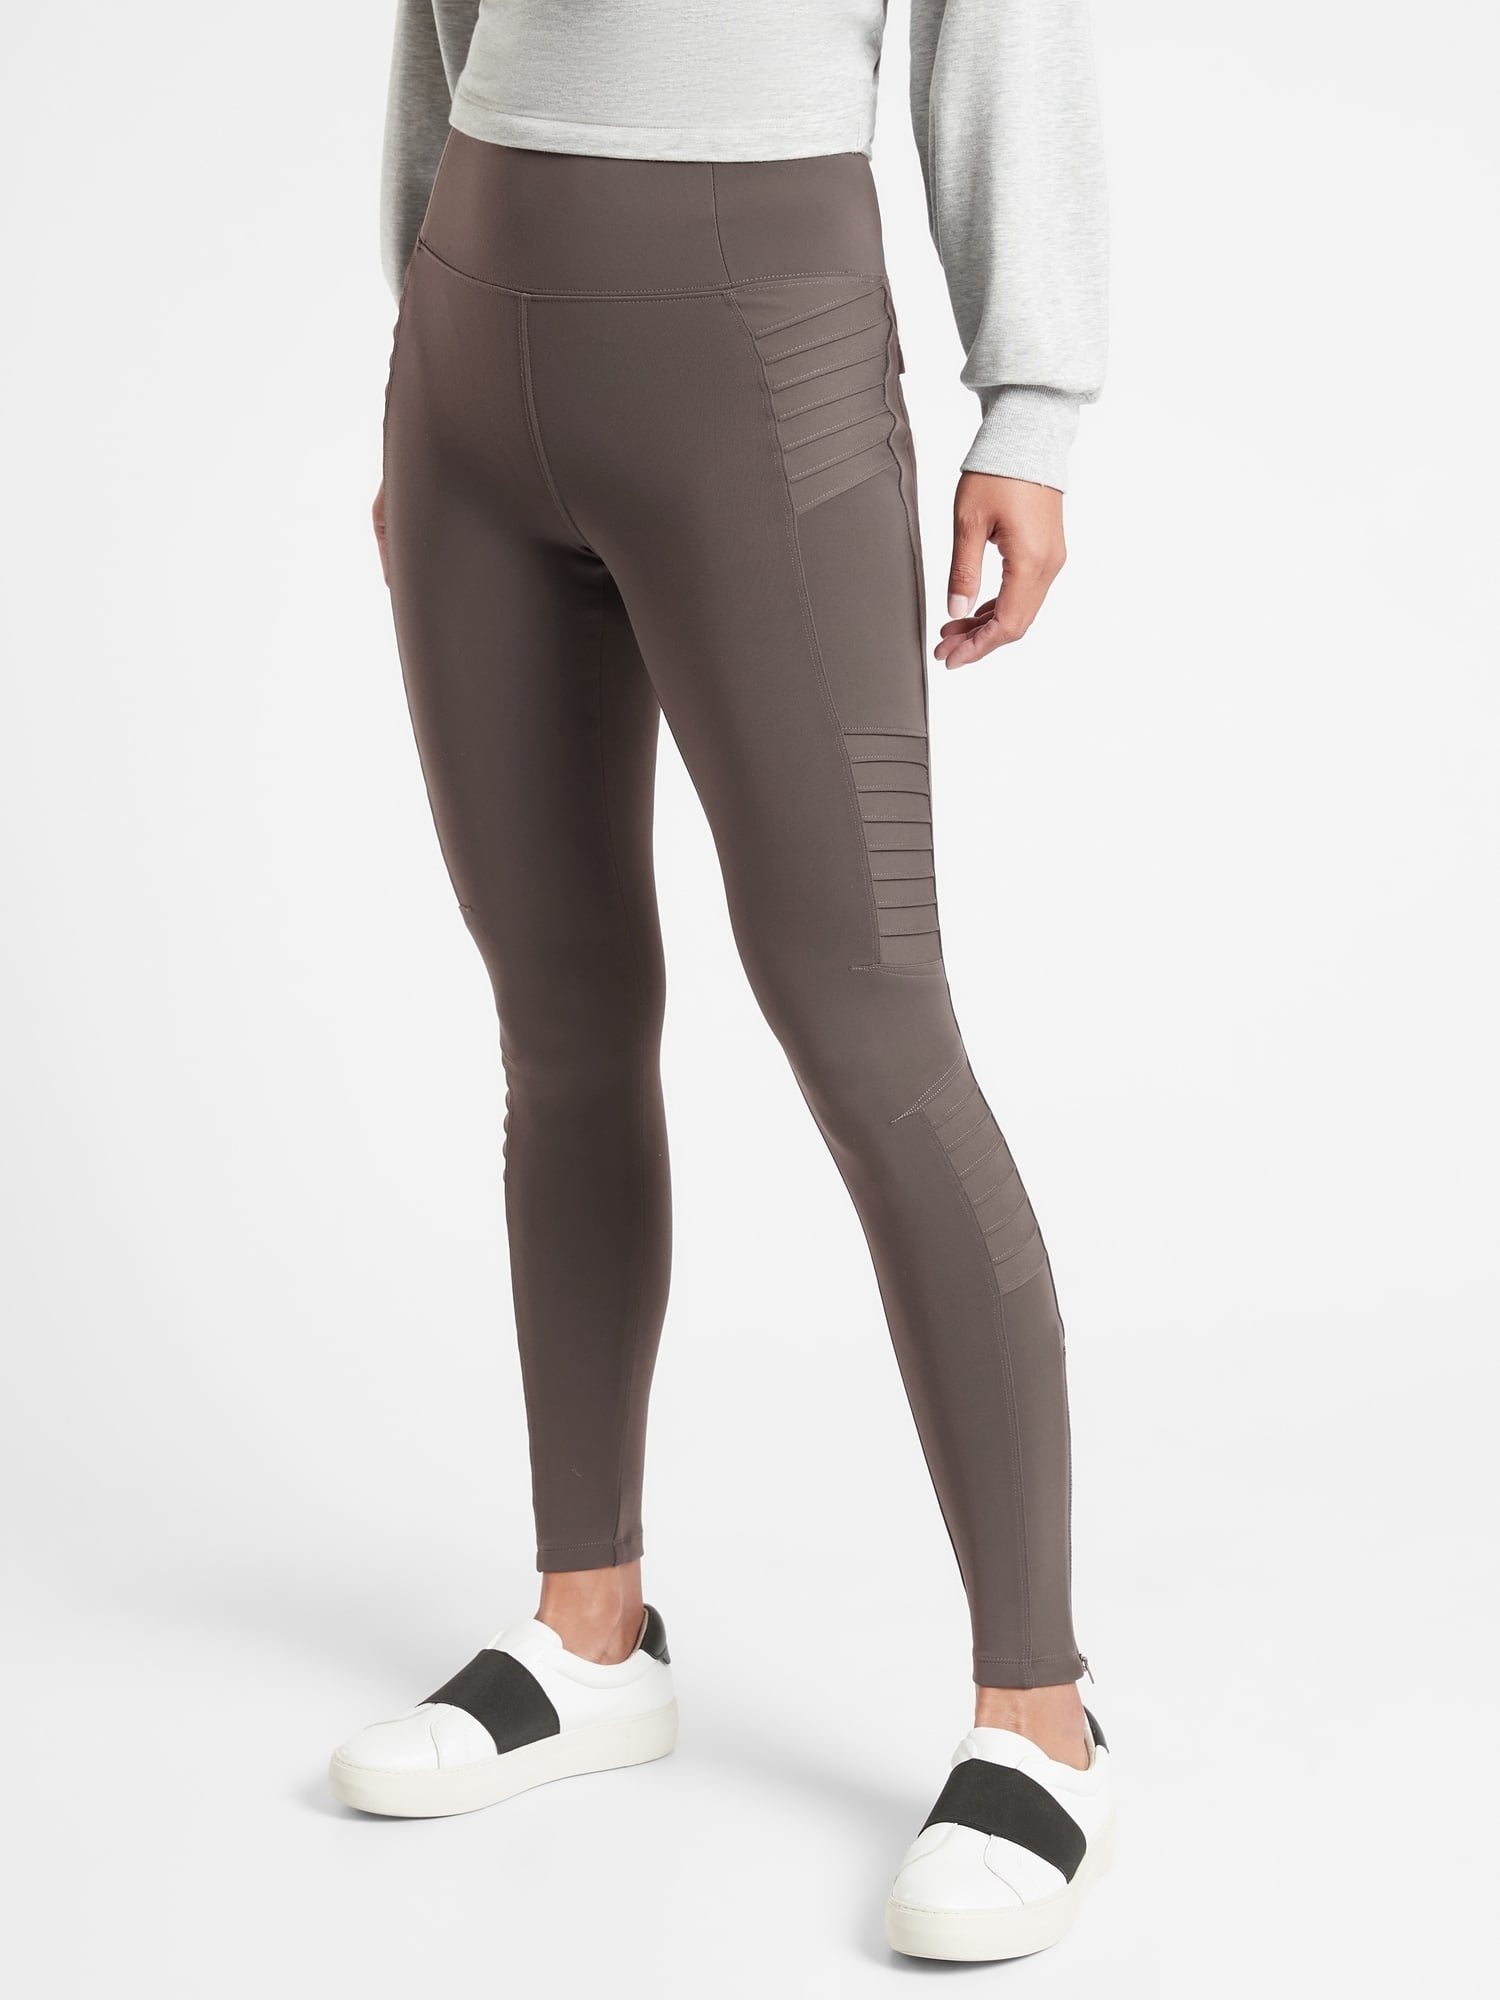 Athleta Delancey Moto Tight, Gym Class Hero! This Brand Has the Best  Mother-Daughter Fitness Sets